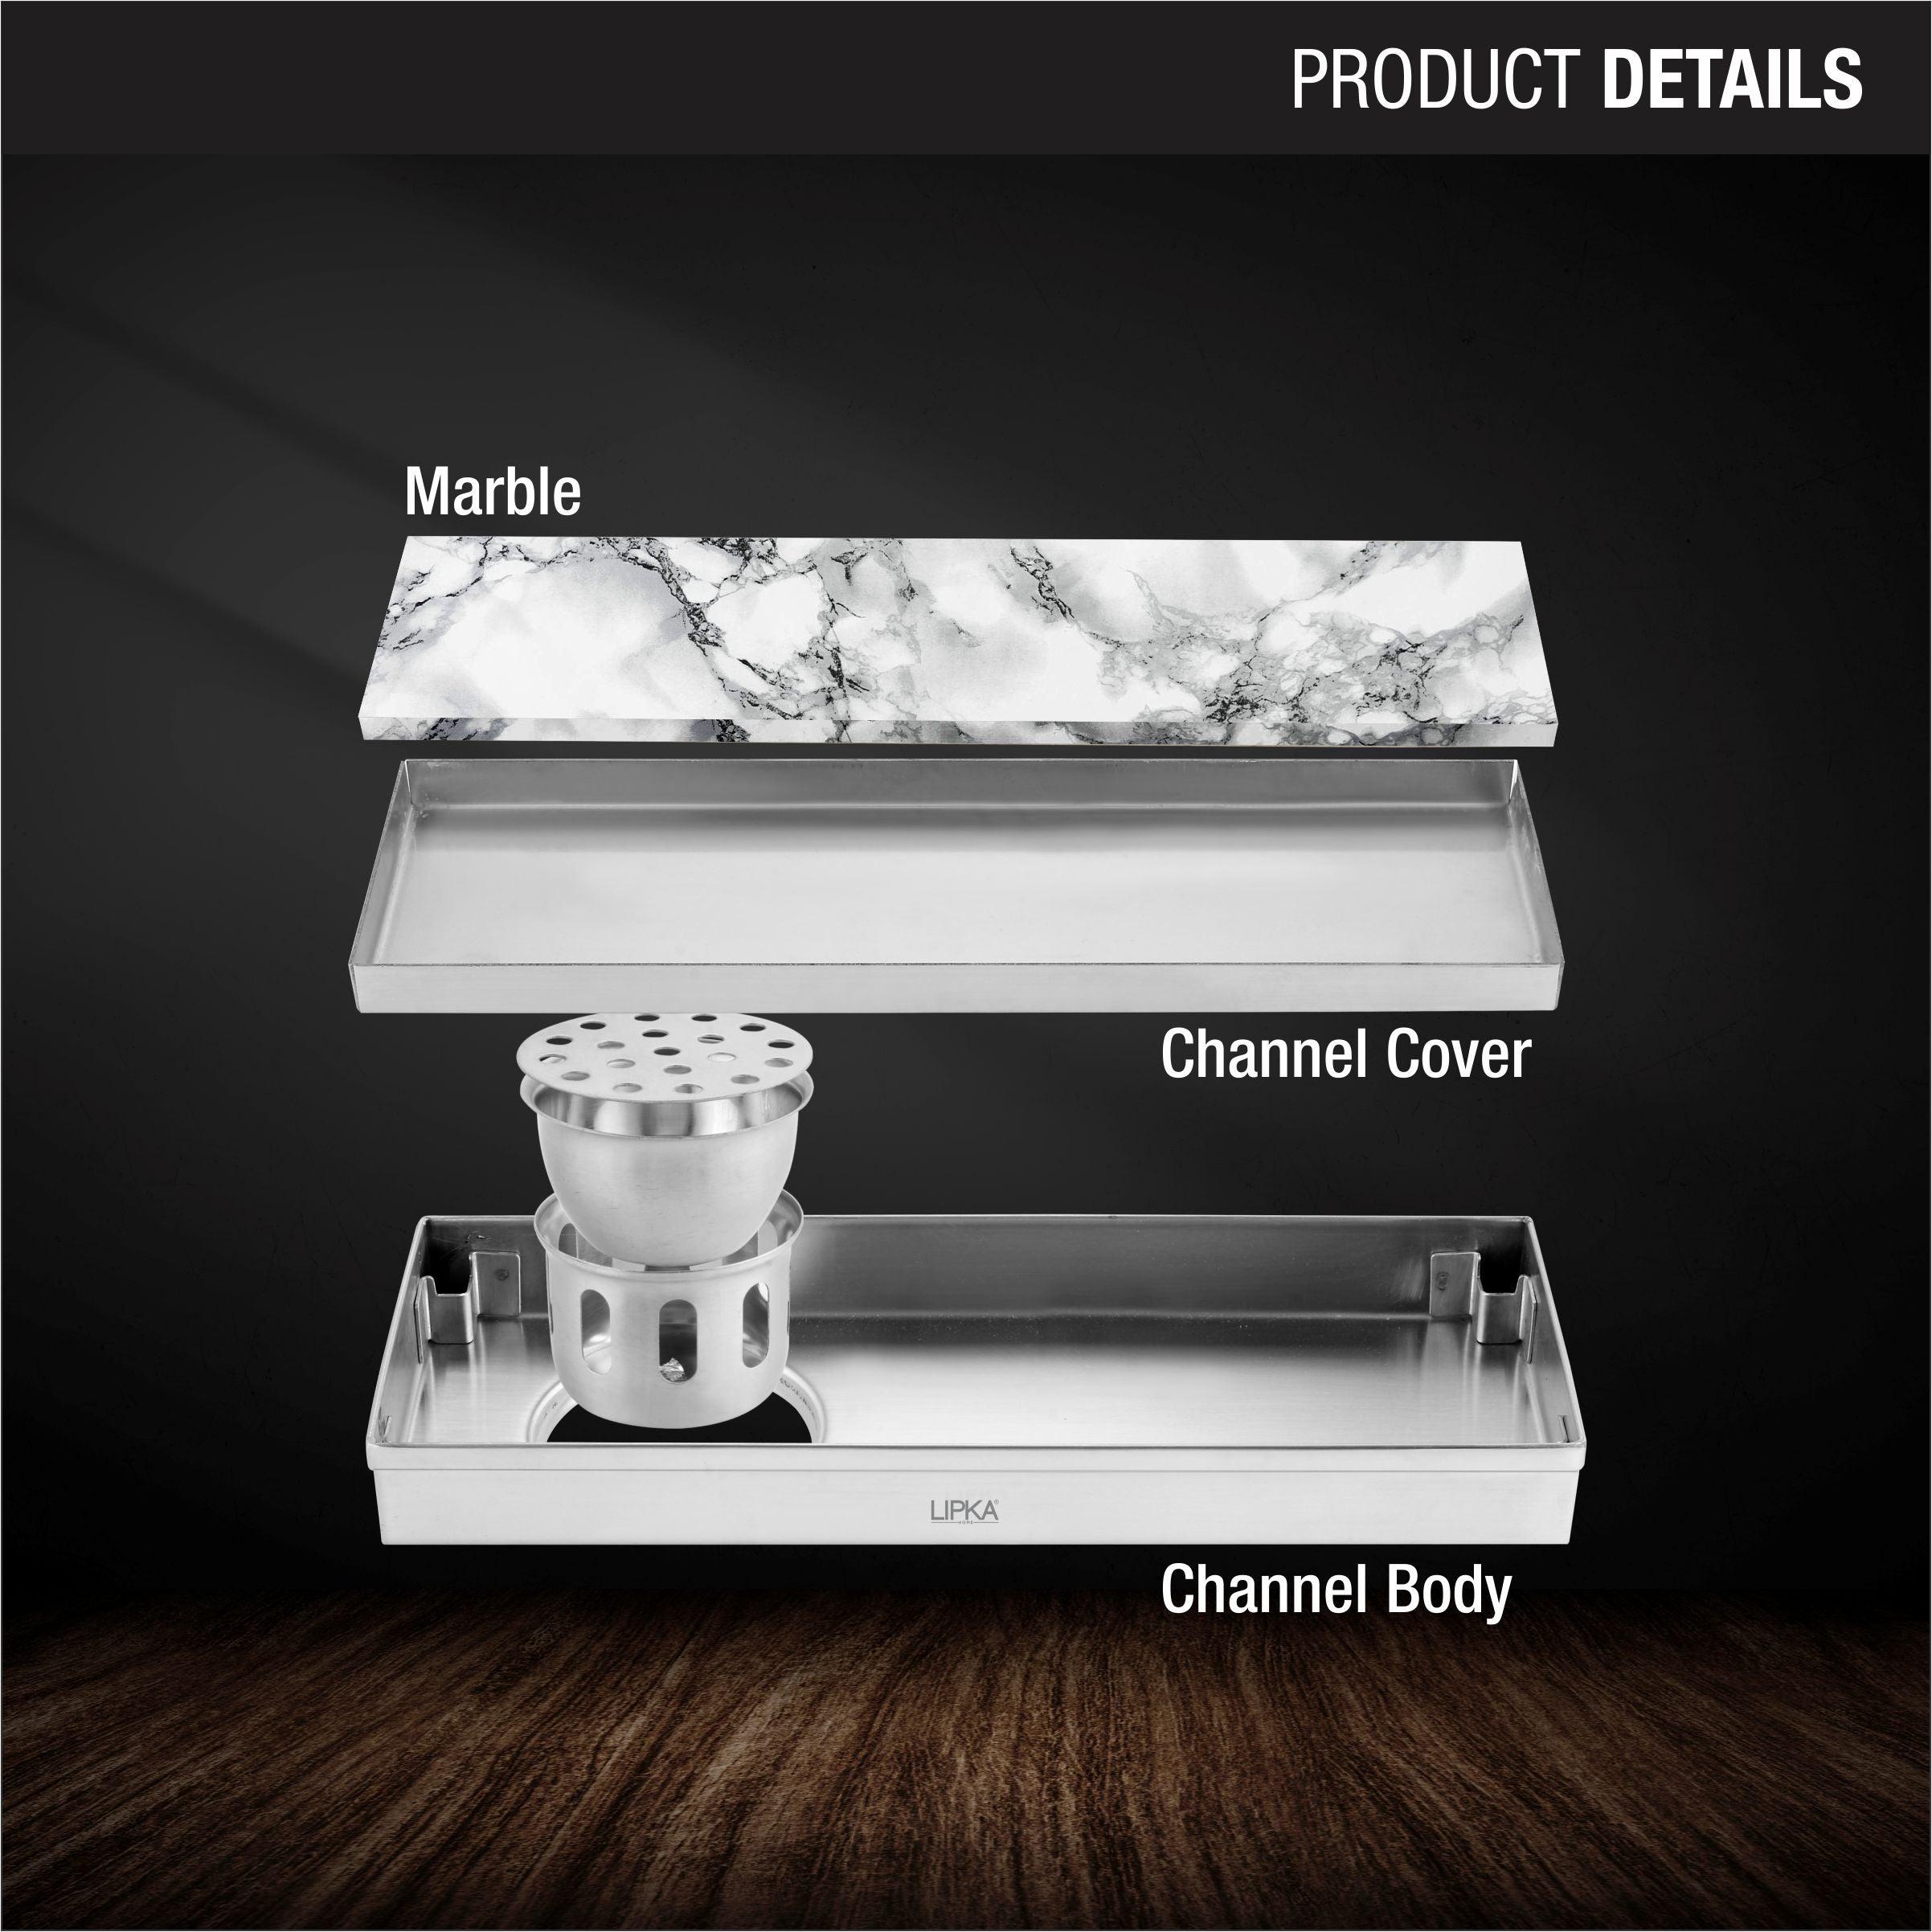 Marble Insert Shower Drain Channel (24 x 5 Inches) product details